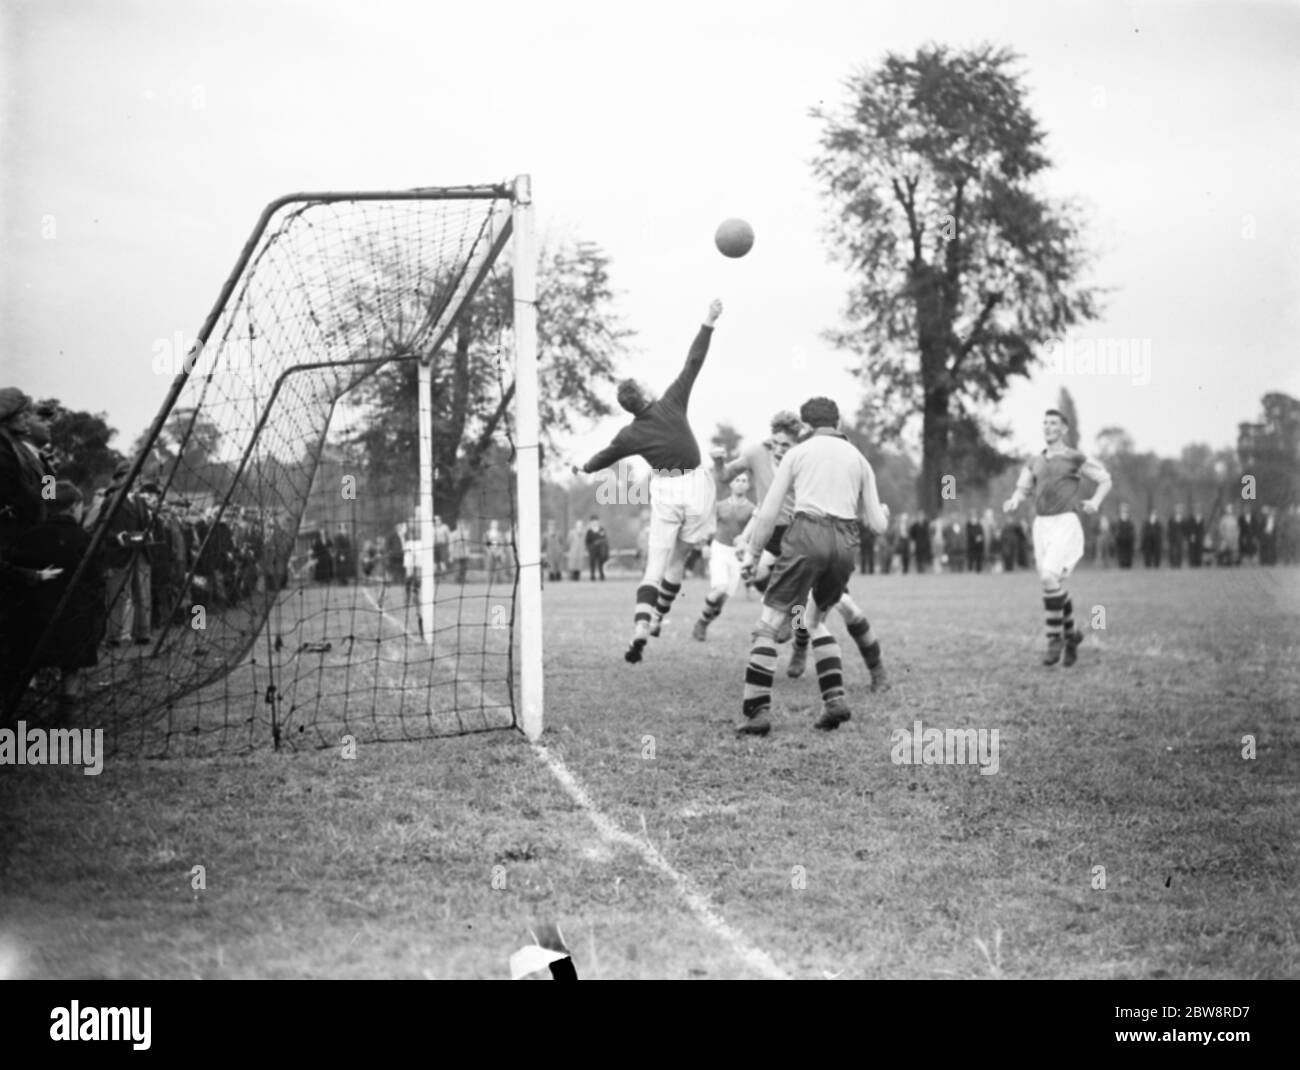 A football match in Swanley , Kent . Goalkeeper reaches for the ball . 1936 Stock Photo